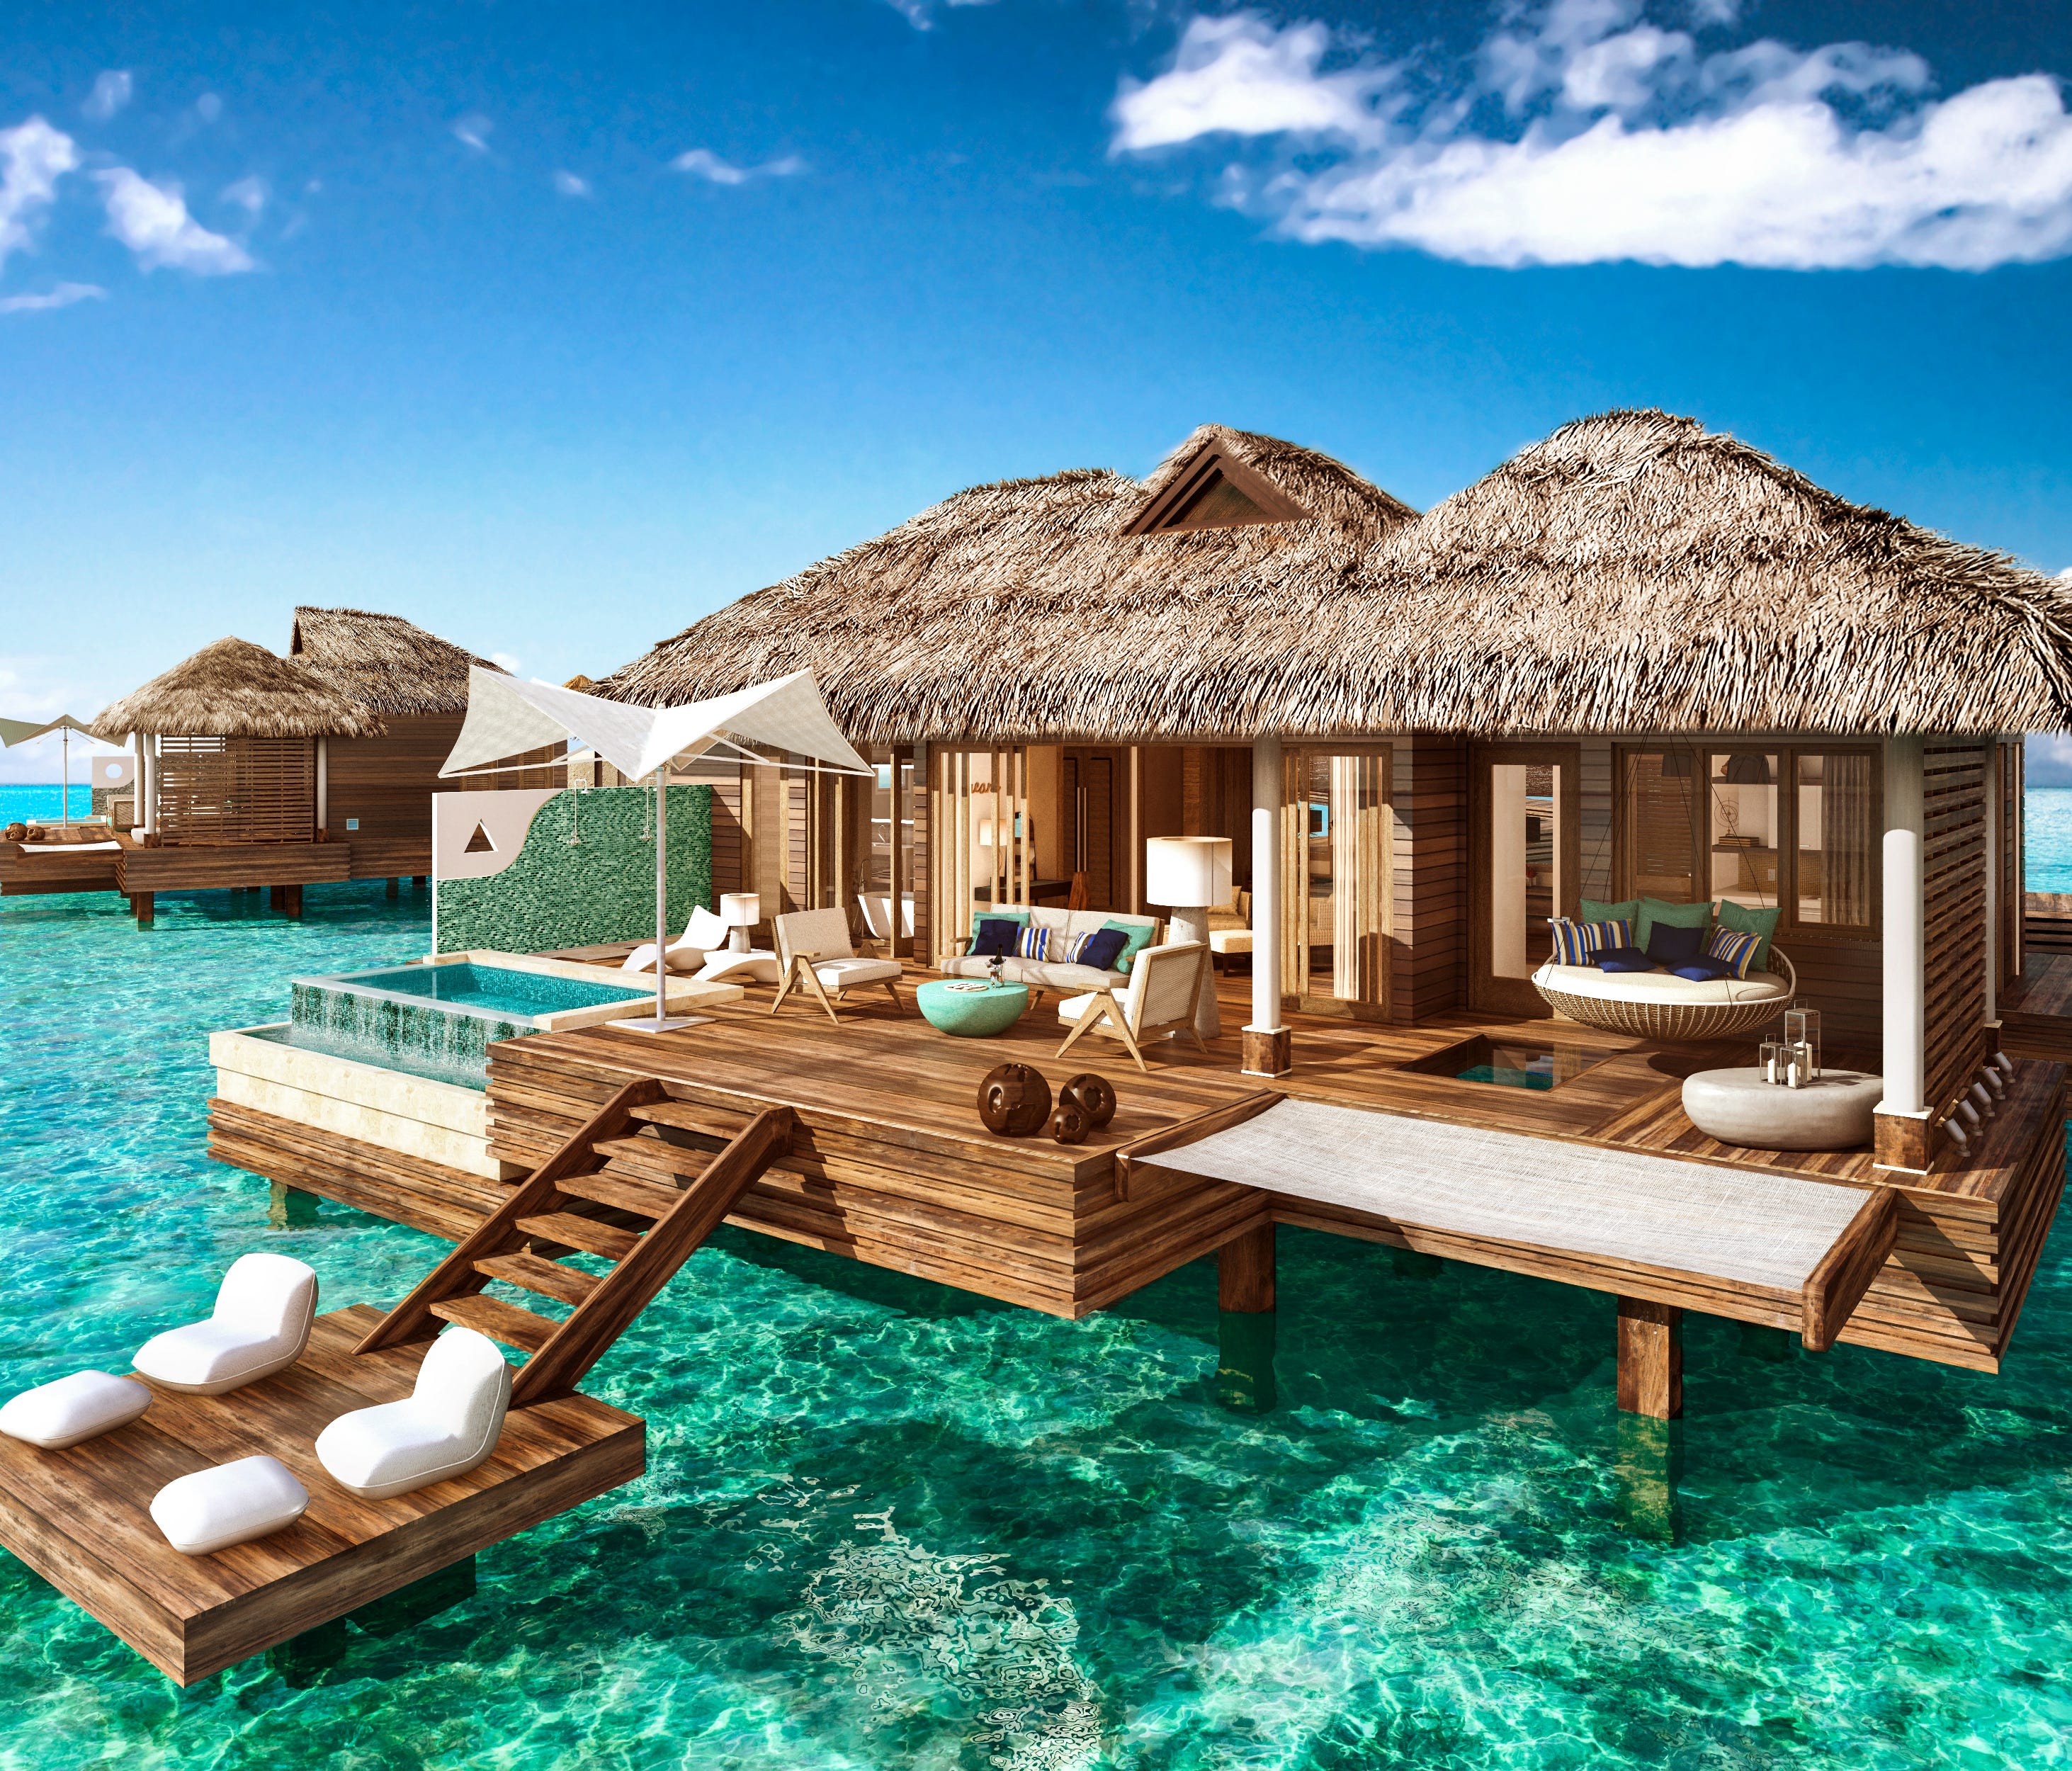 Over-the-water suites come to the Caribbean | 11alive.com